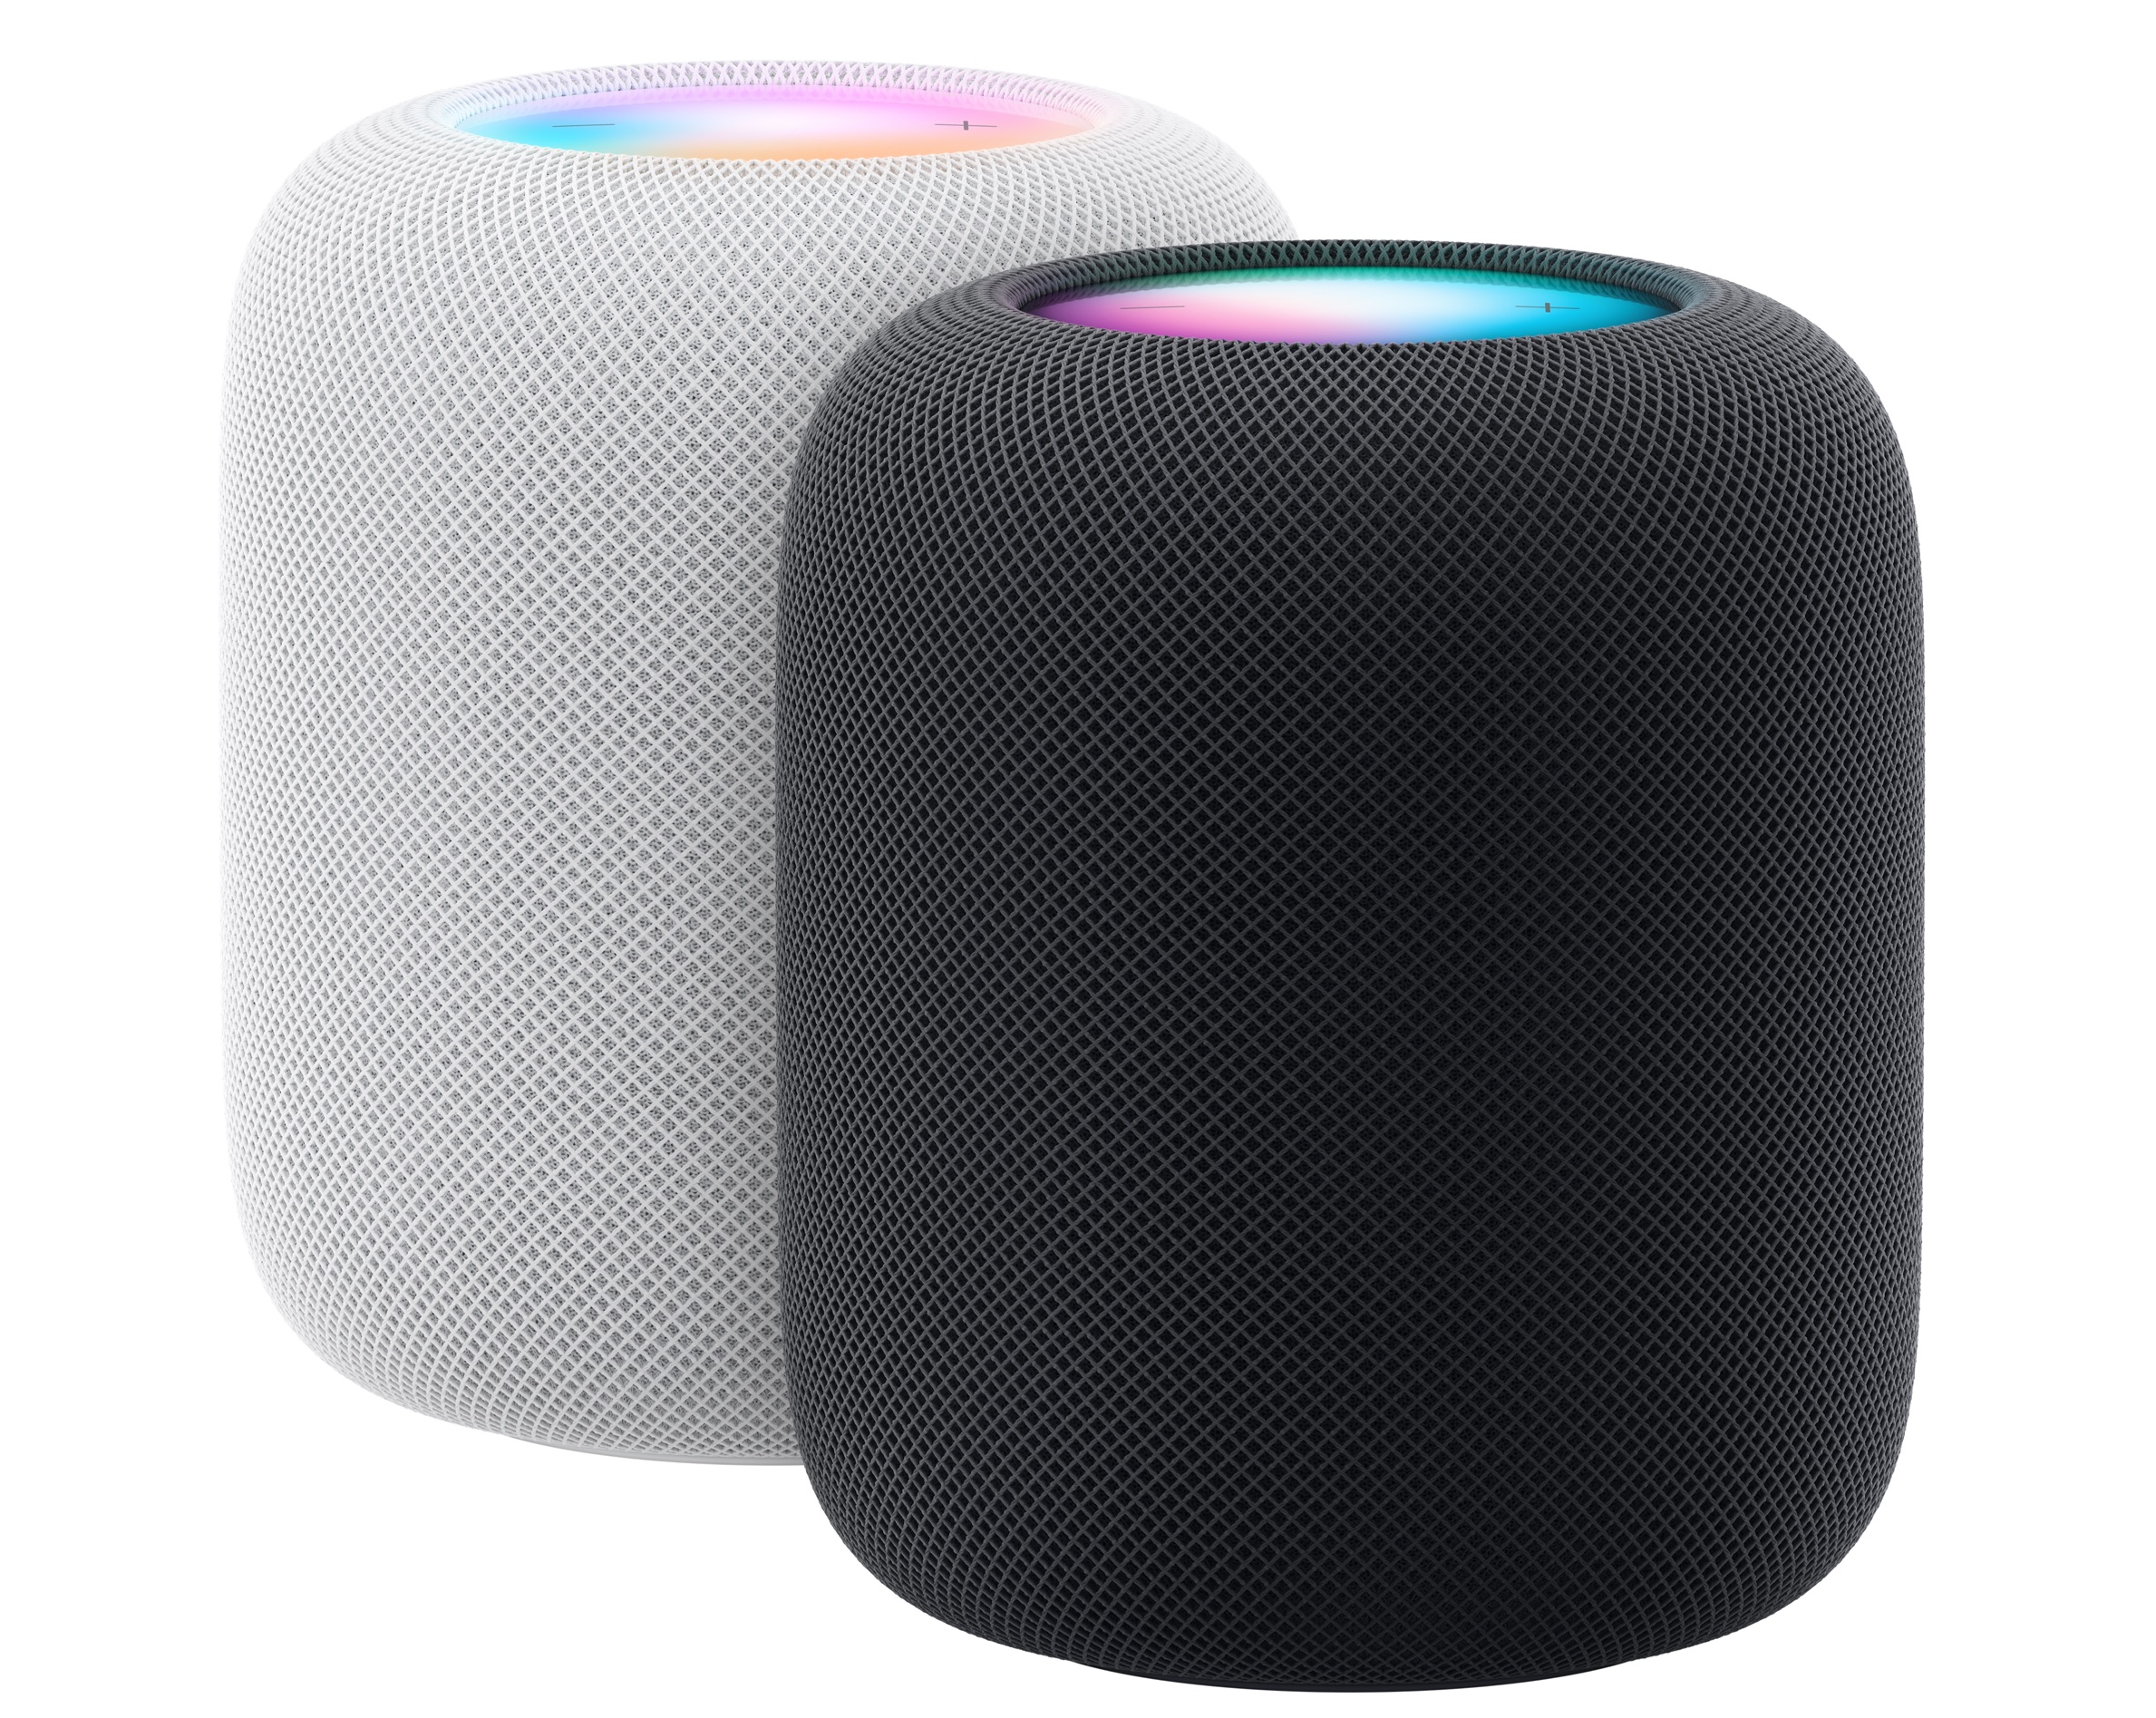 Some initial thoughts on Apple’s resurrected HomePod